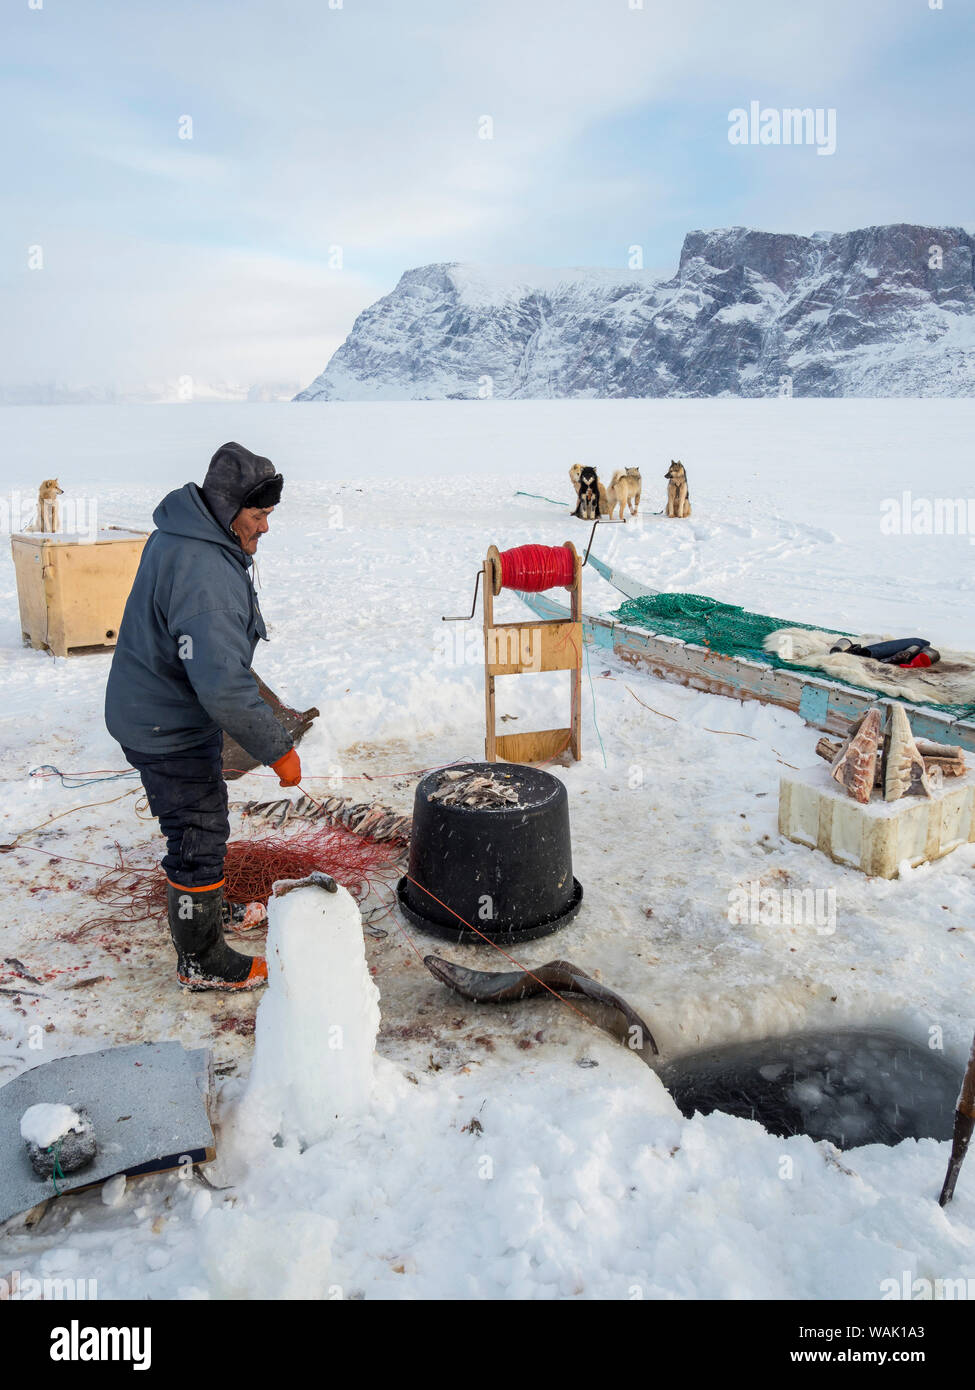 Fishermen in the Uummannaq Fjord System, Greenland. The fjords are frozen during winter, the fishermen use sleds to drive to holes in the ice. They lower lines with bait down to 1000 meters. (Editorial Use Only) Stock Photo